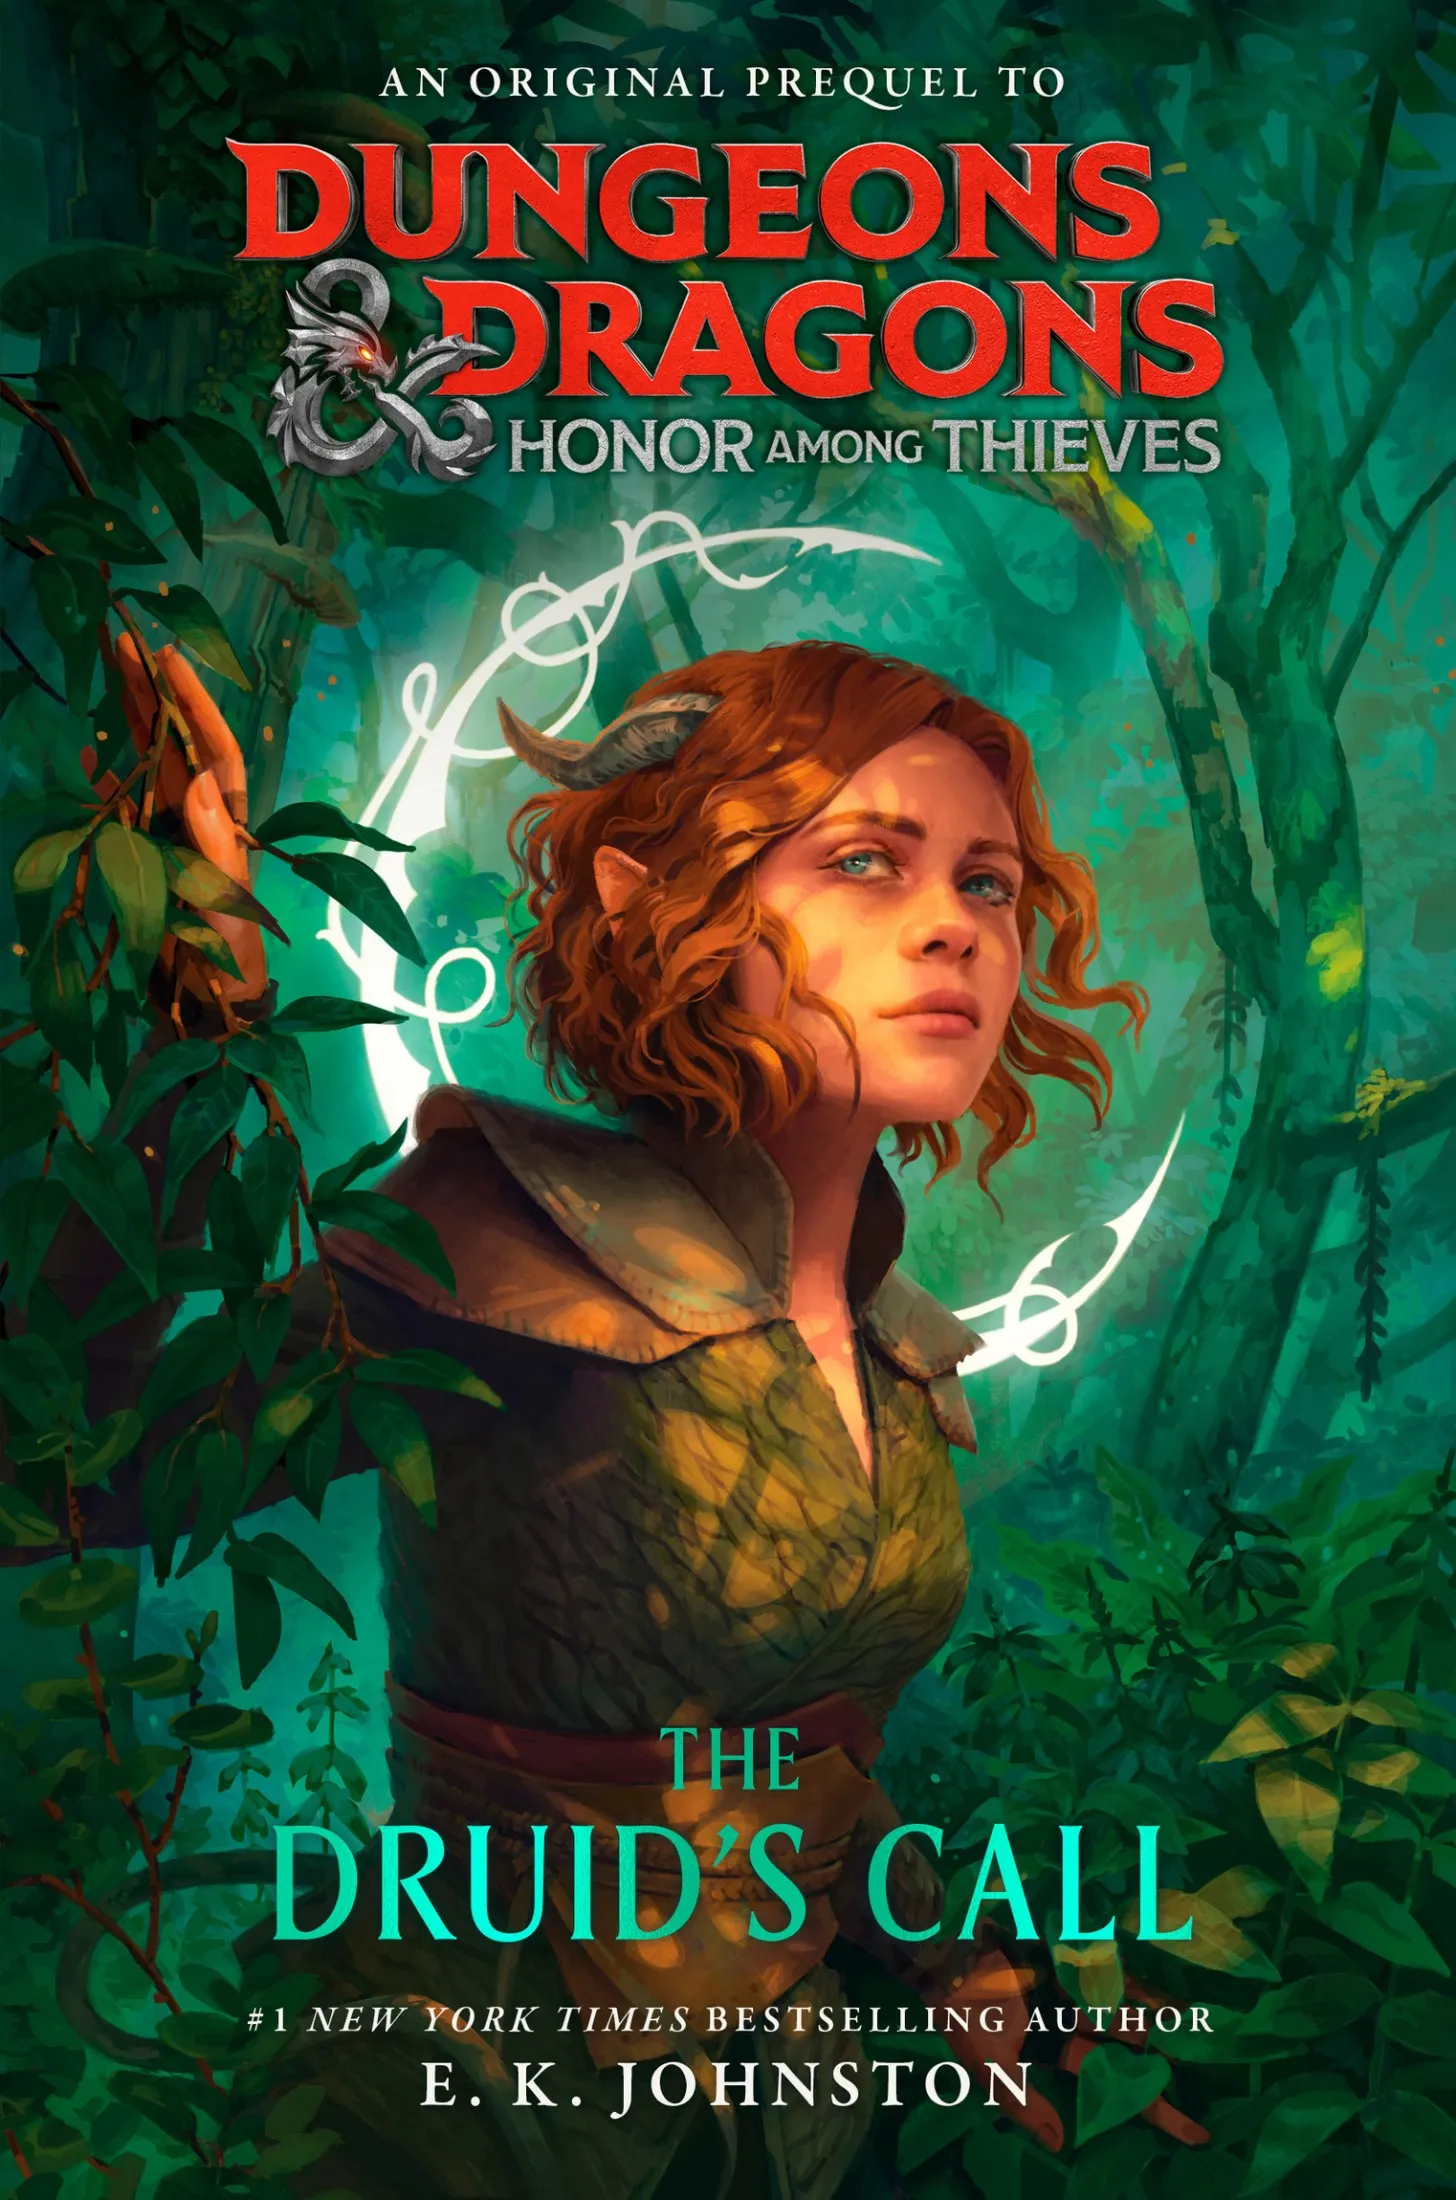 The Druid's Call (Dungeons & Dragons: Honor Among Thieves)